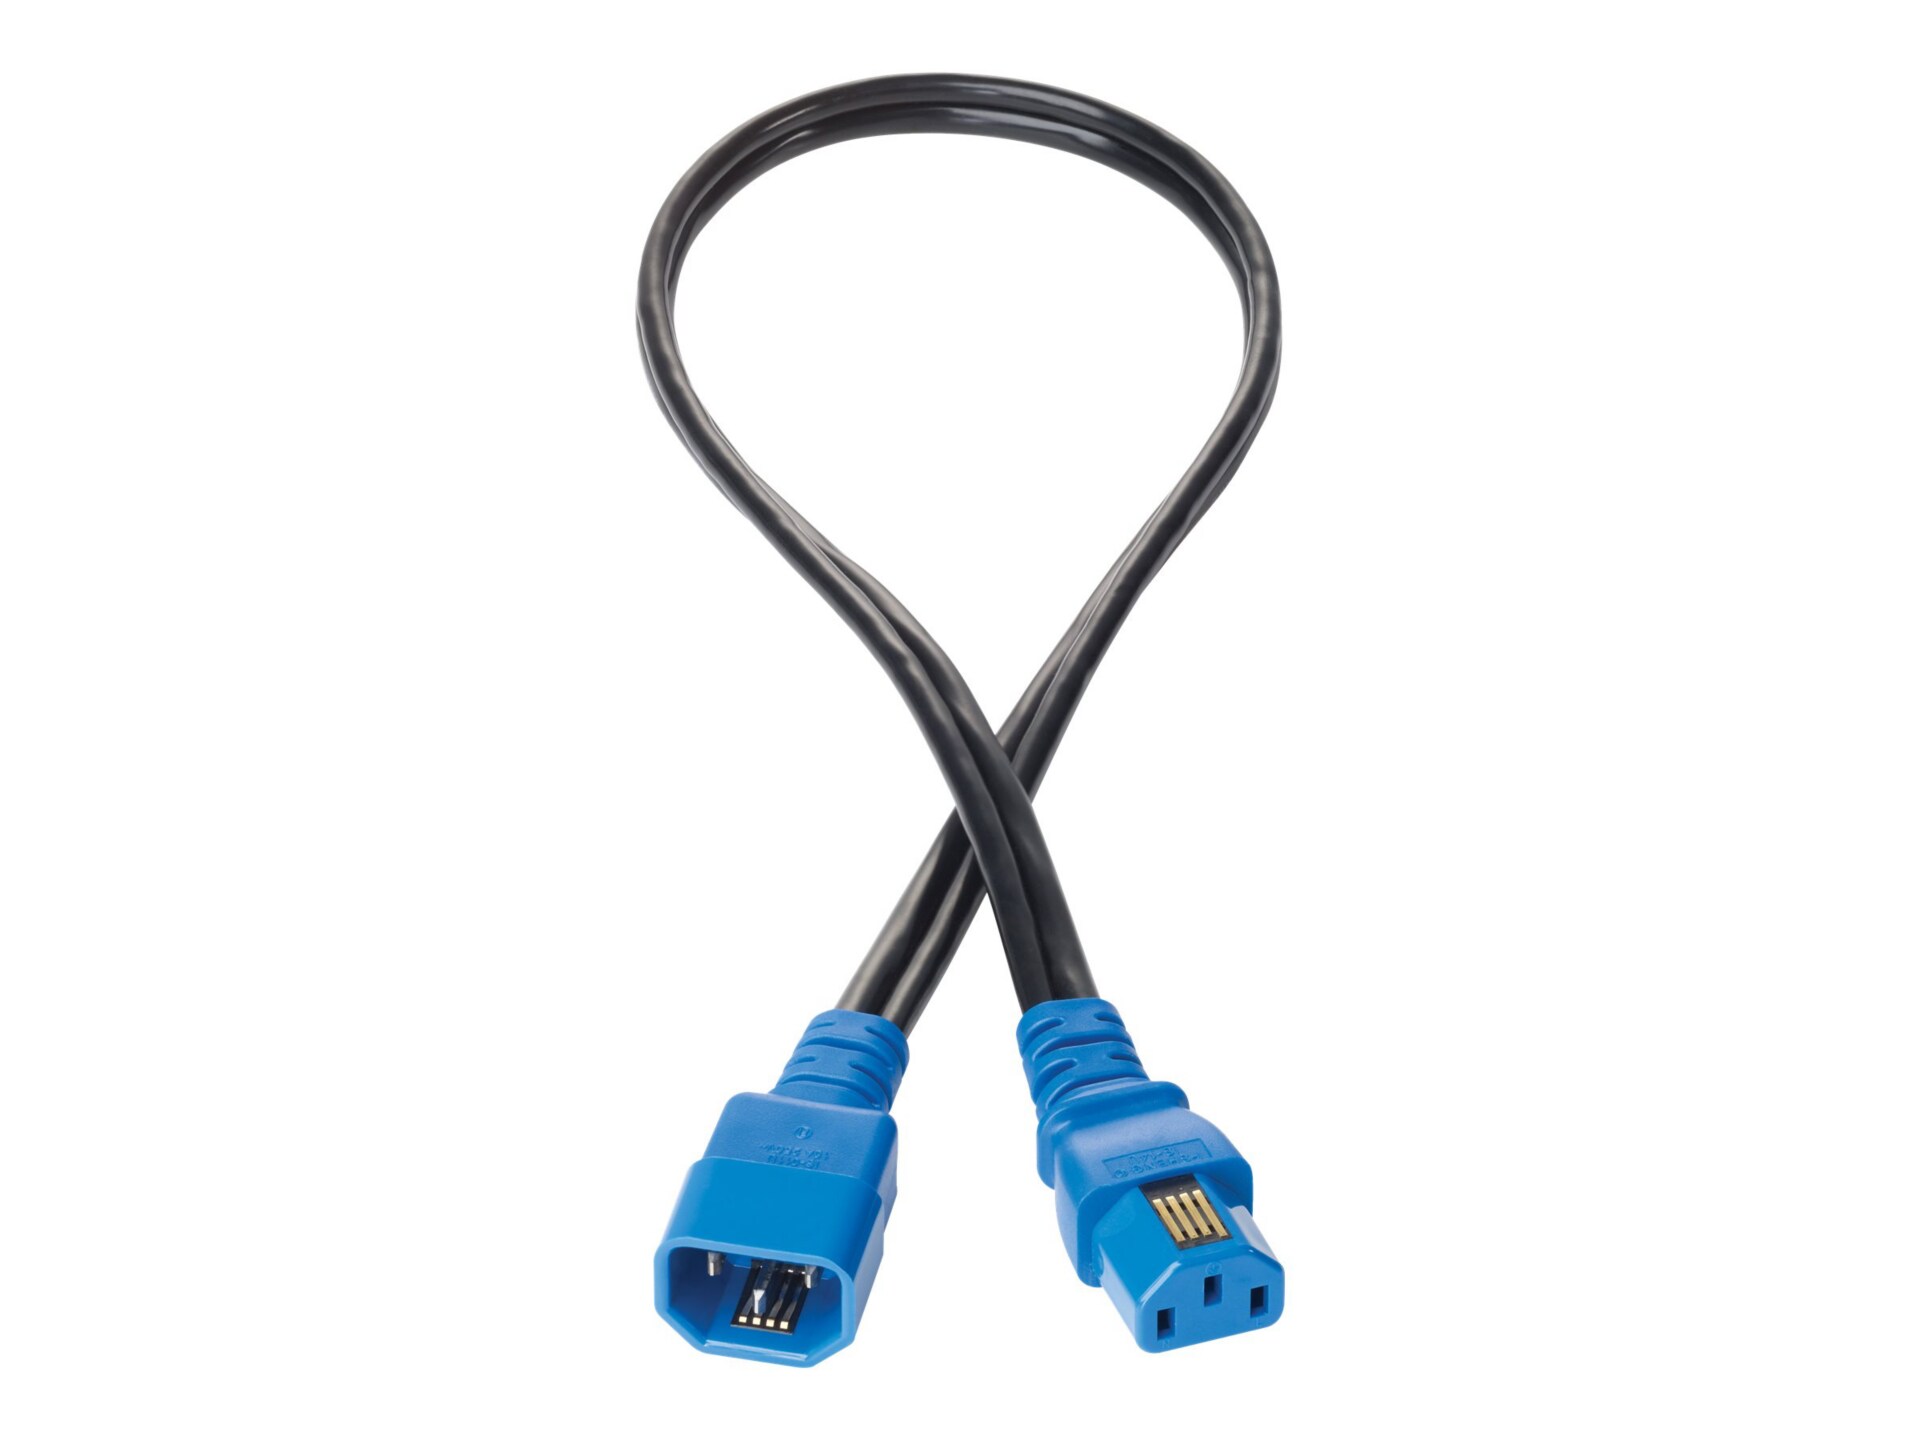 HPE Jumper Cord - power cable - power IEC 60320 C13 to IEC 60320 C14 - 70 cm